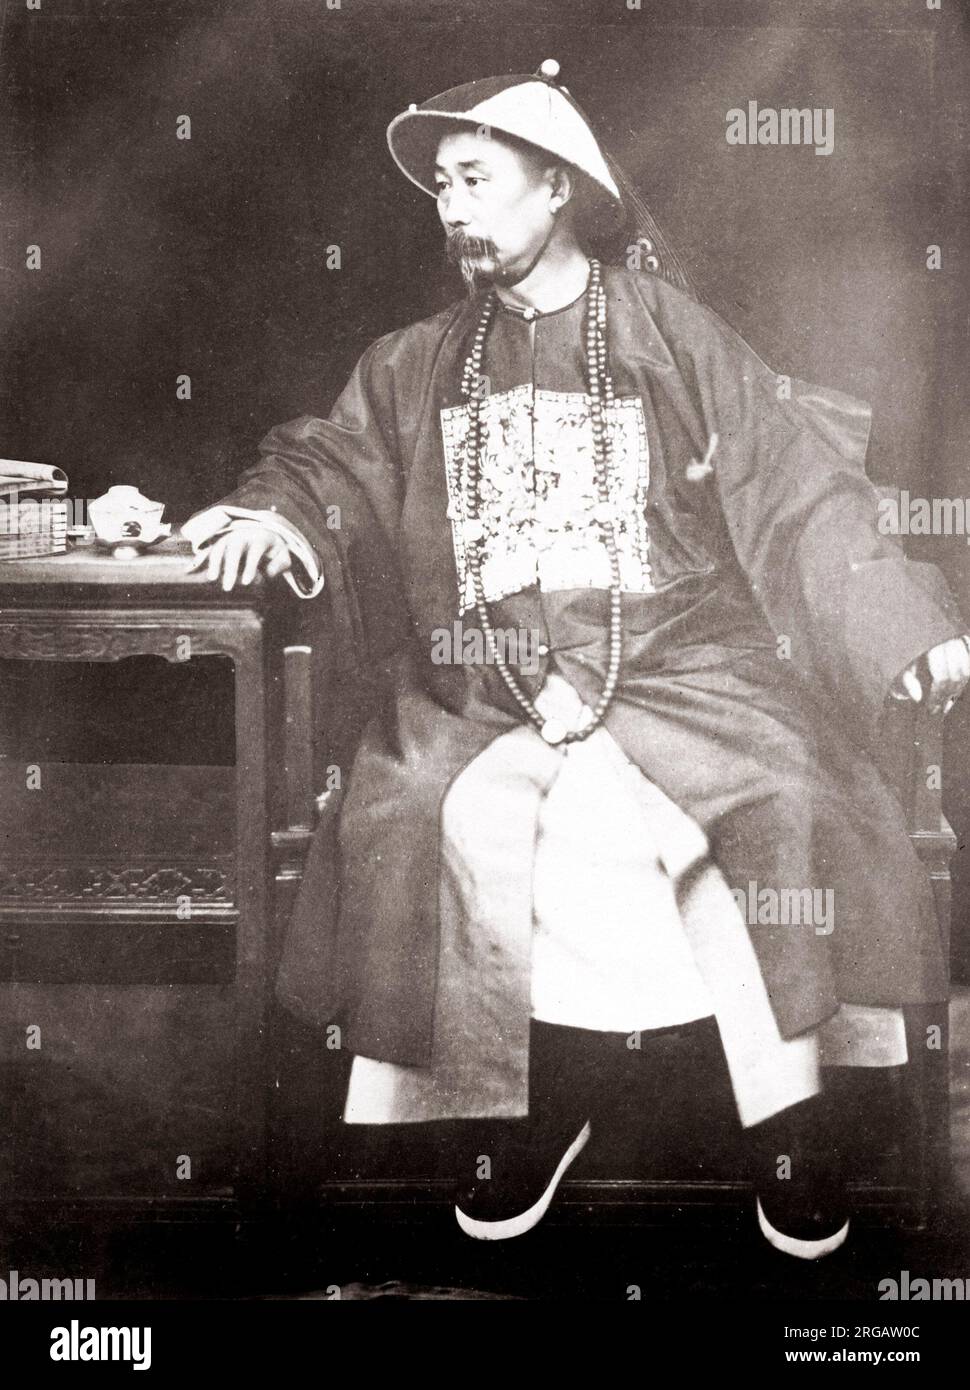 Portrait of Li Hongzhang, also know as Earl Li in Tianjin, 1878, by Liang Shitai (also known as See Tay) (Chinese, active in Hong Kong, Shanghai, and Tianjin, 1870s-1880s) Stock Photo